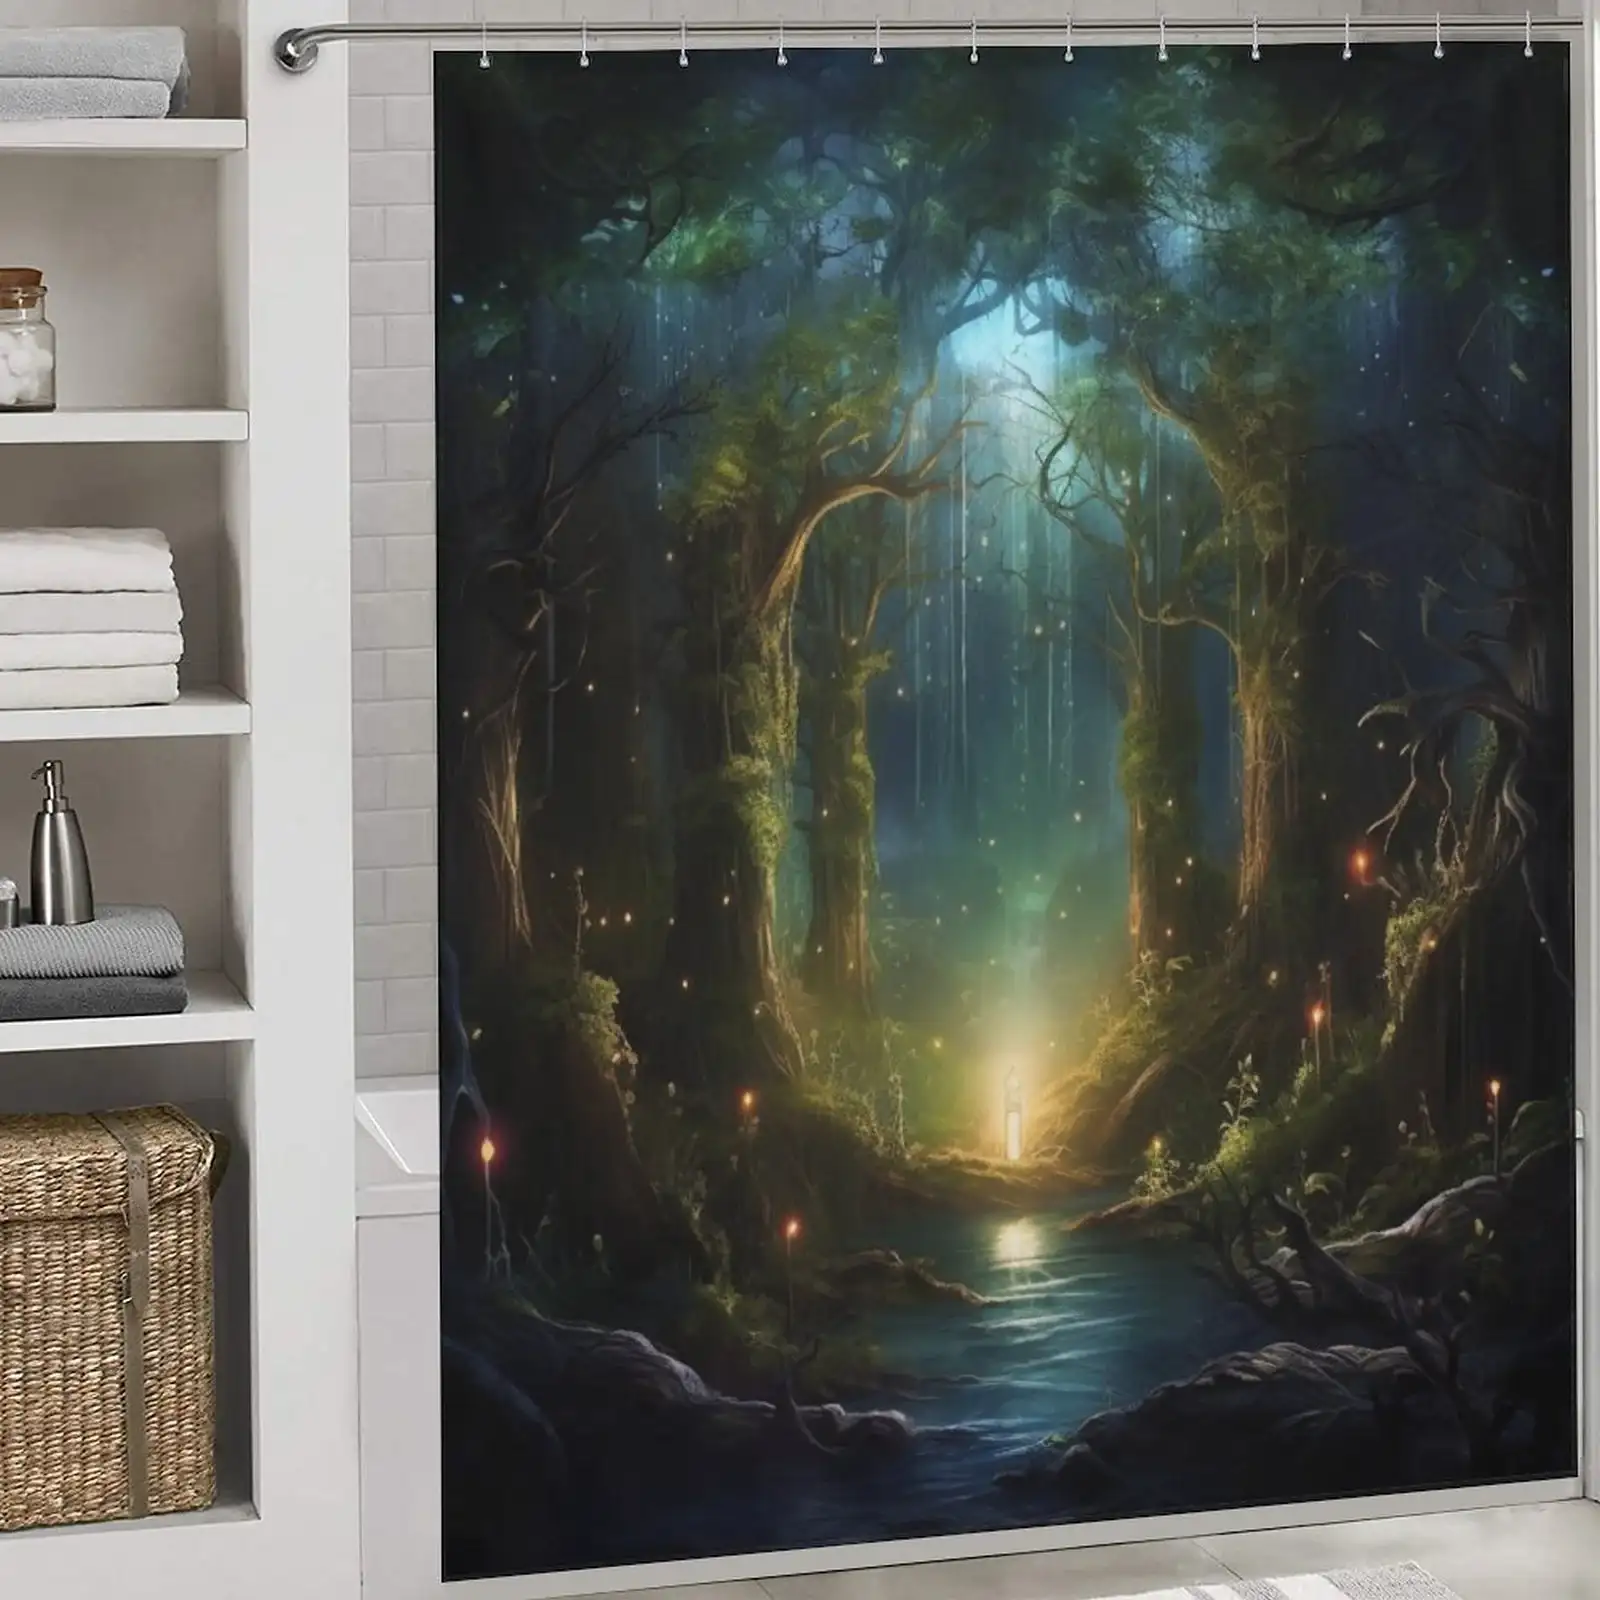 Unique Shower Curtains for Small Bathrooms: A shower curtain with an image of a forest.